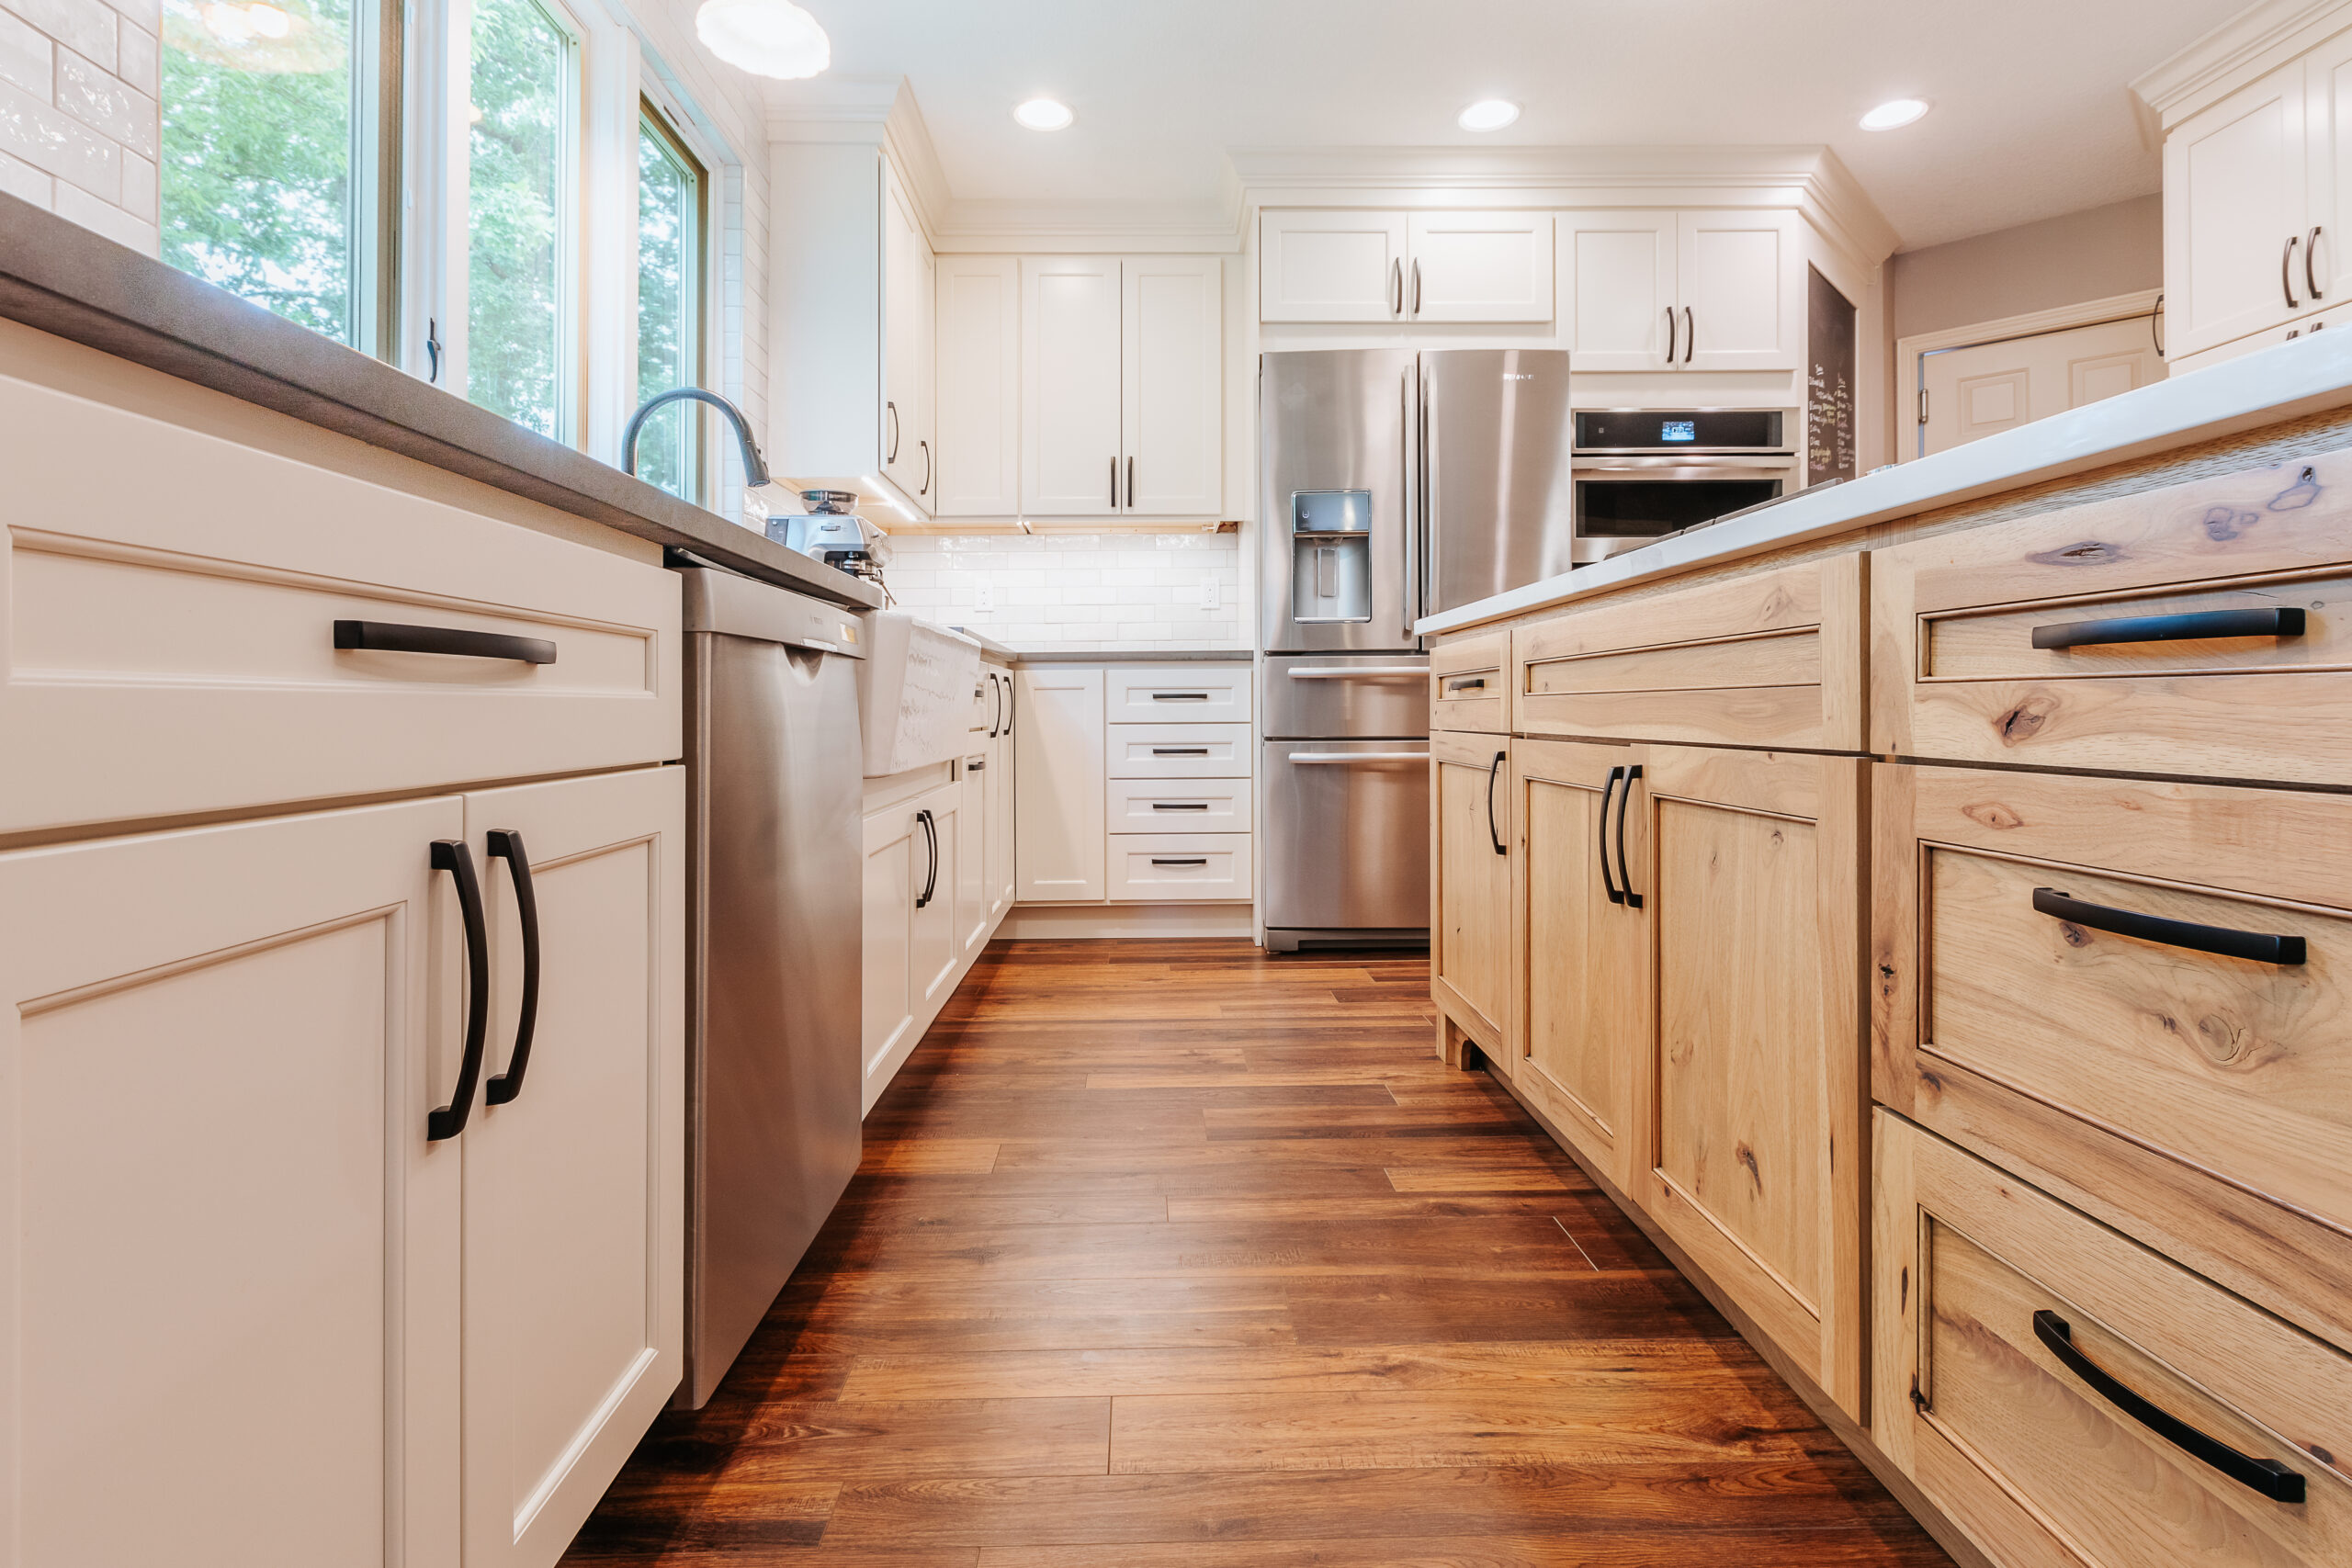 Painted Vs. Stained Kitchen Cabinets: Which one is right for you?